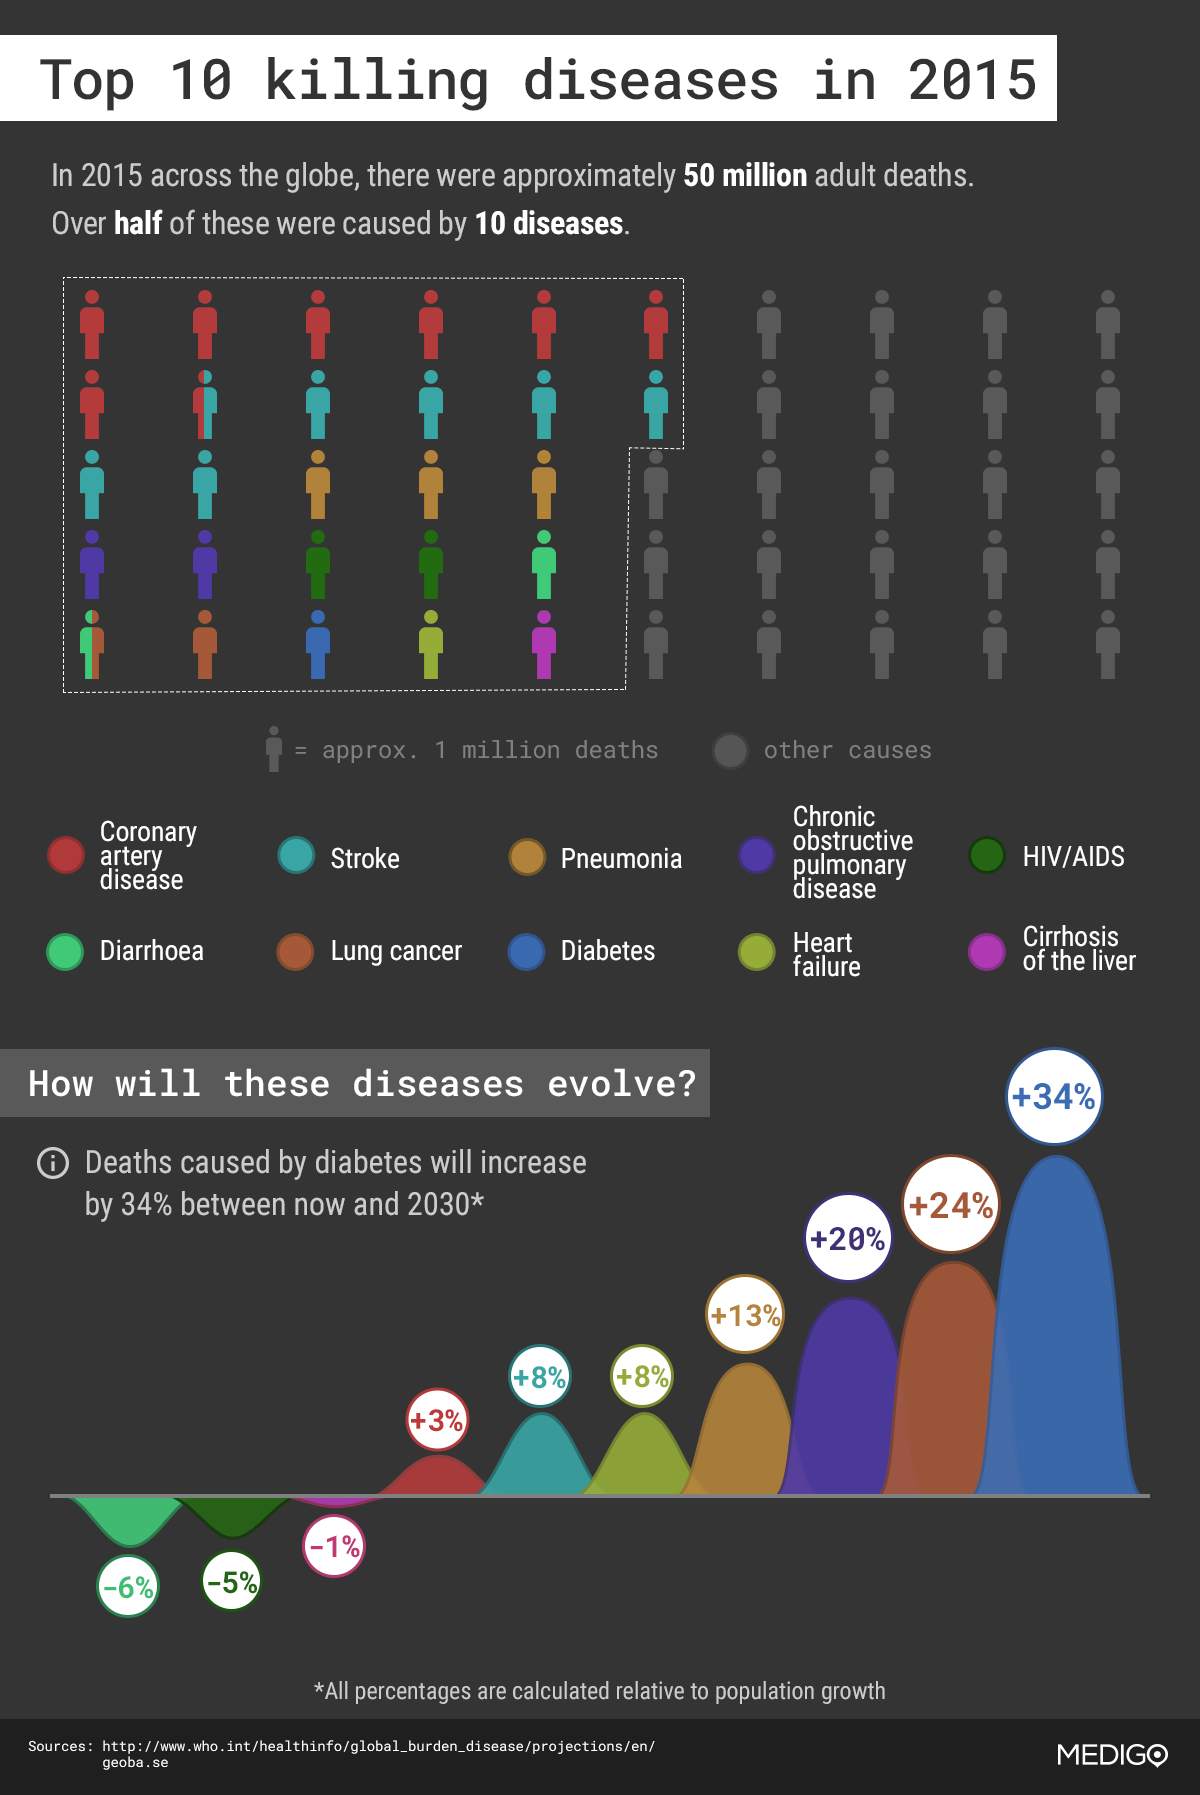 MEDIGO – Mortality and Causes of Death. 2015 and 2030: a comparison